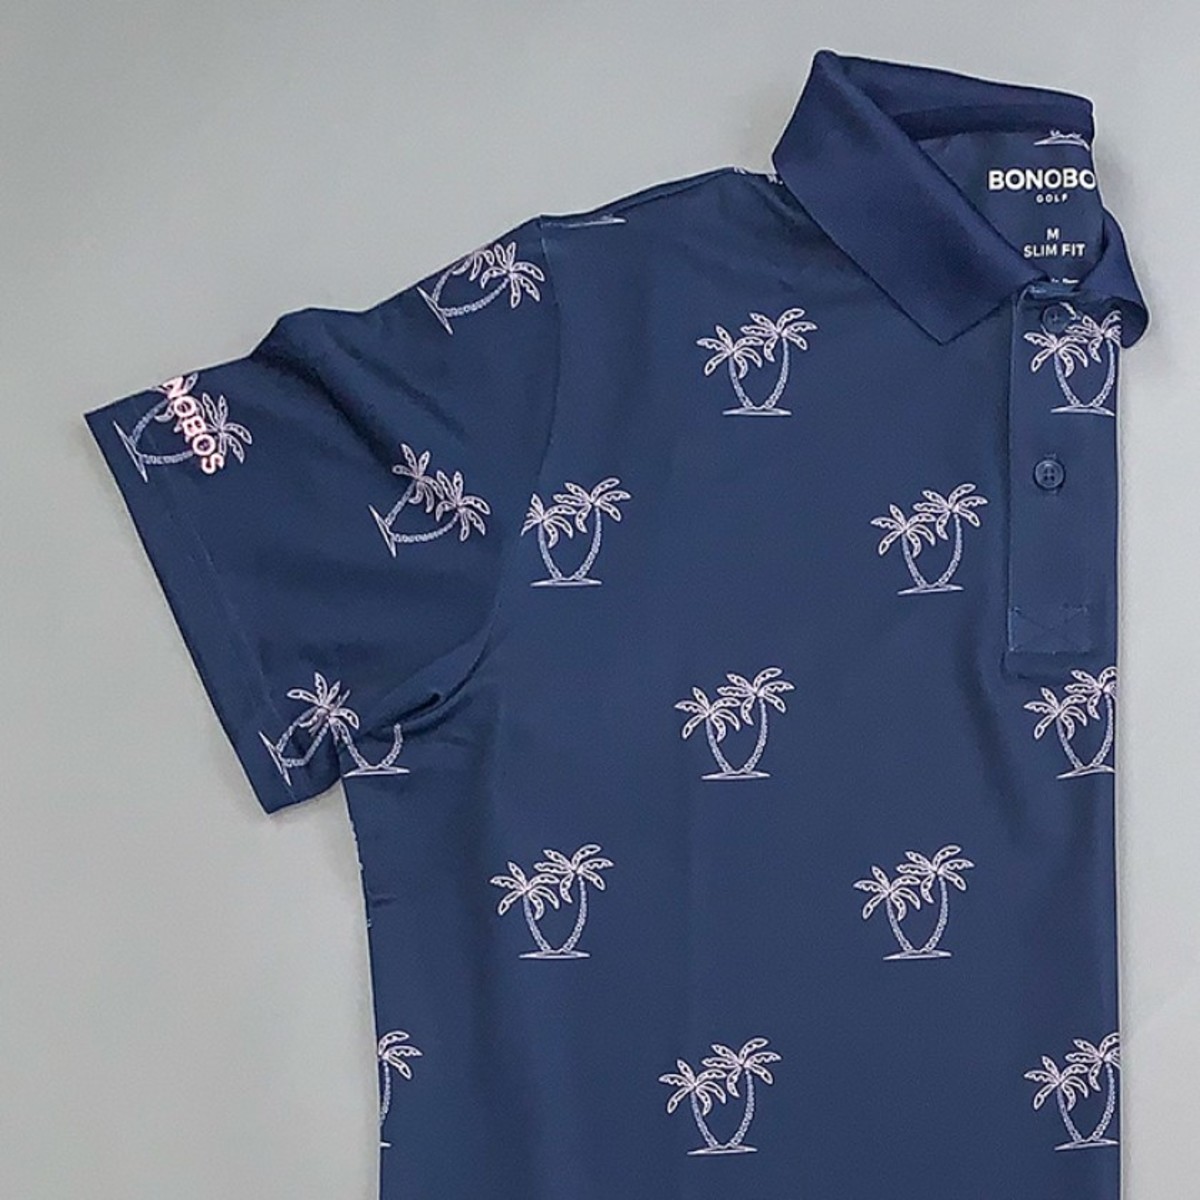 Bonobos' Performance Golf Polo shirt in navy with a neon palms print.